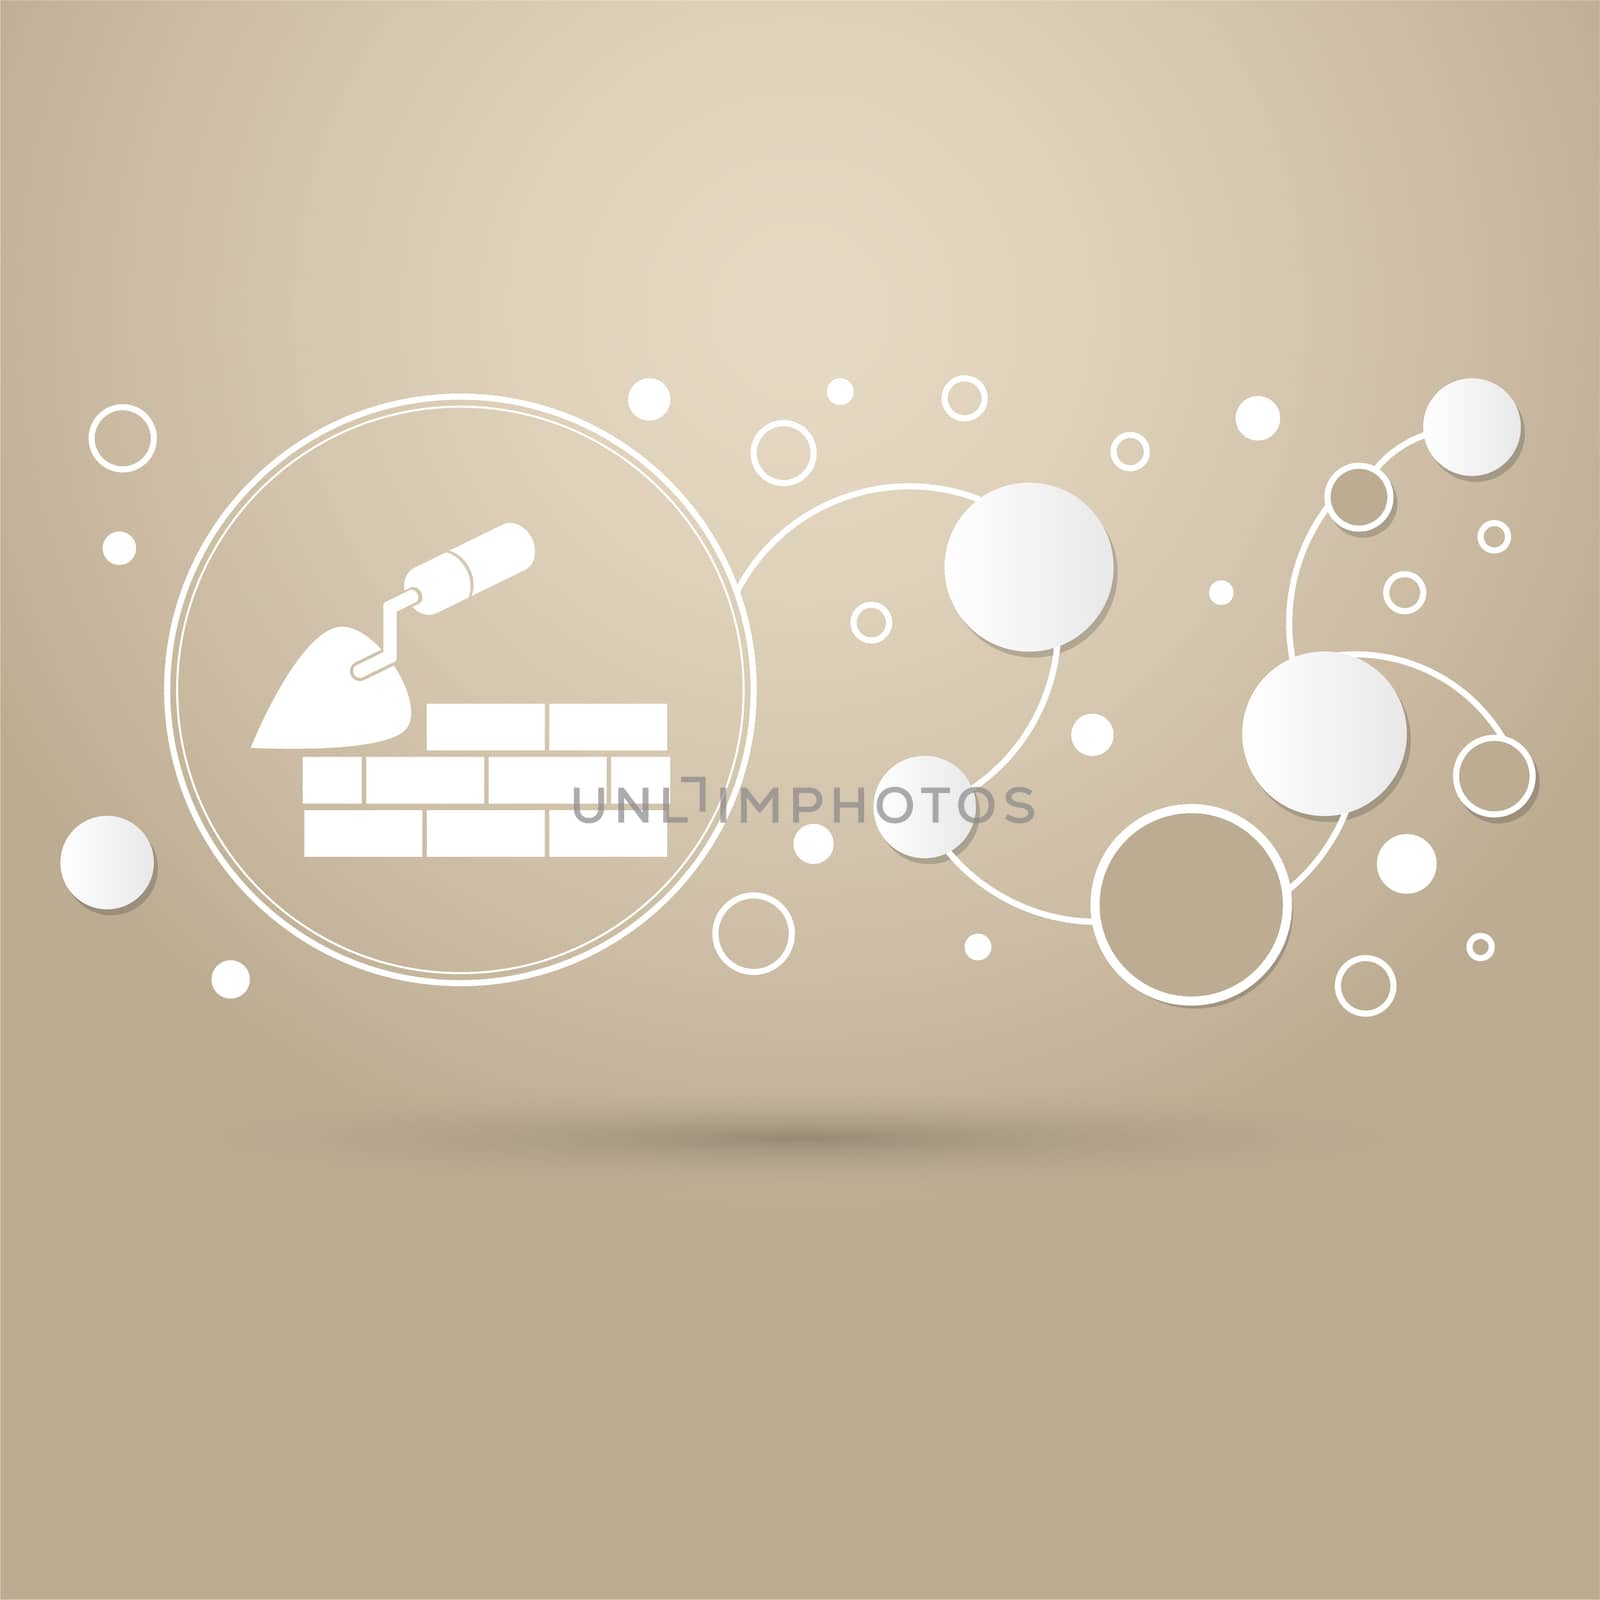 Trowel building and brick wall icon on a brown background with elegant style and modern design infographic.  by Adamchuk